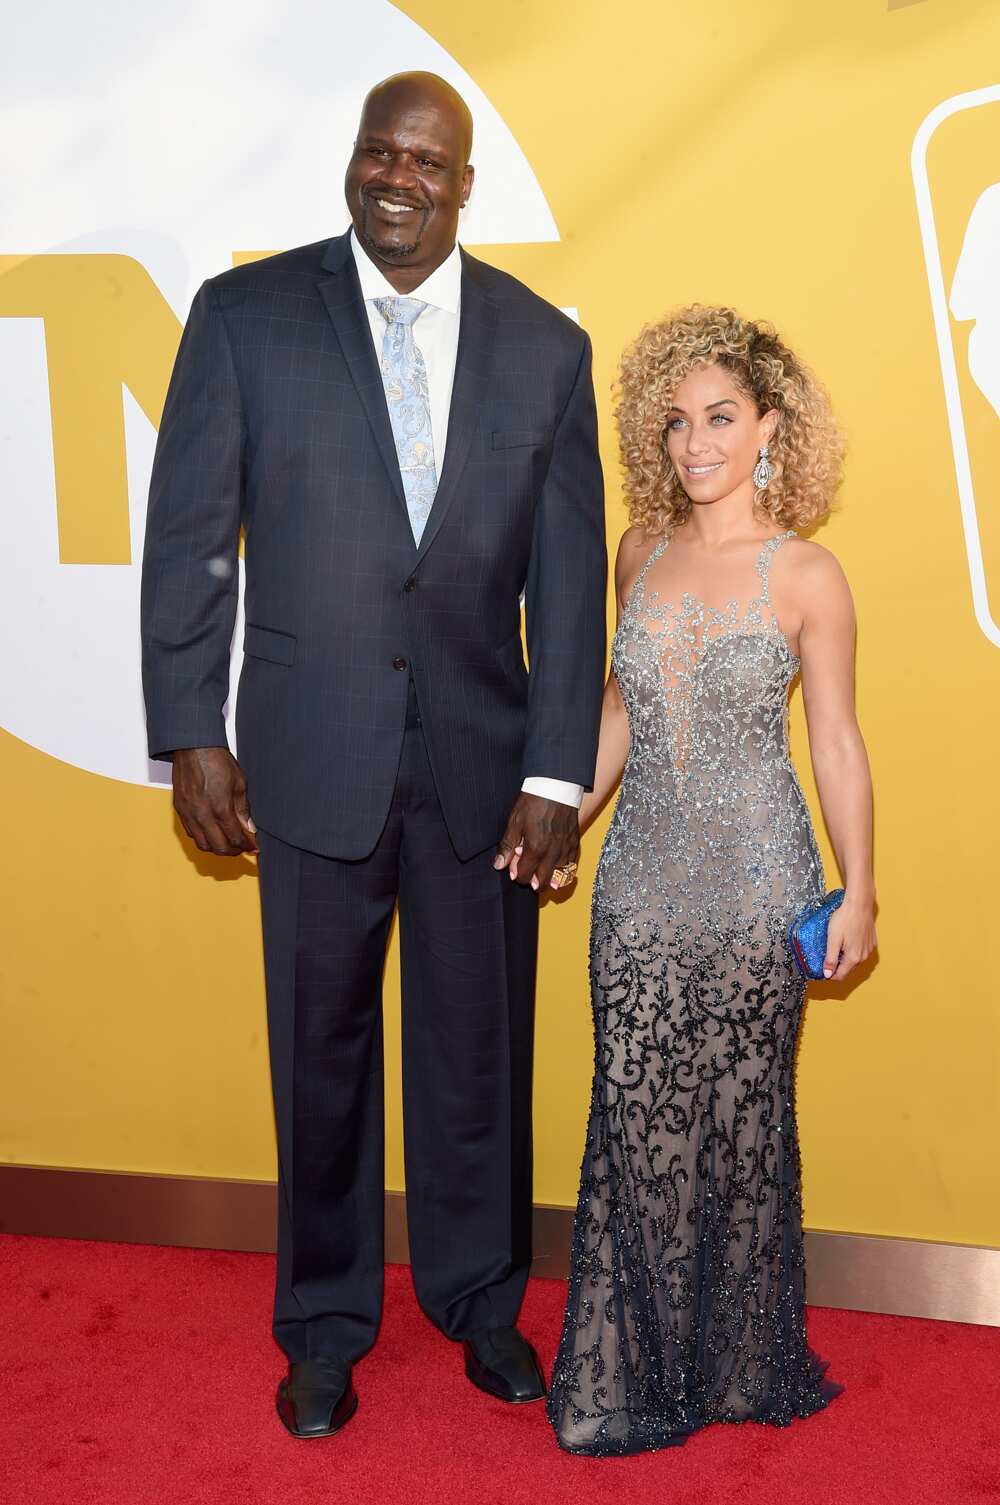 Is Shaquille O'Neal married?